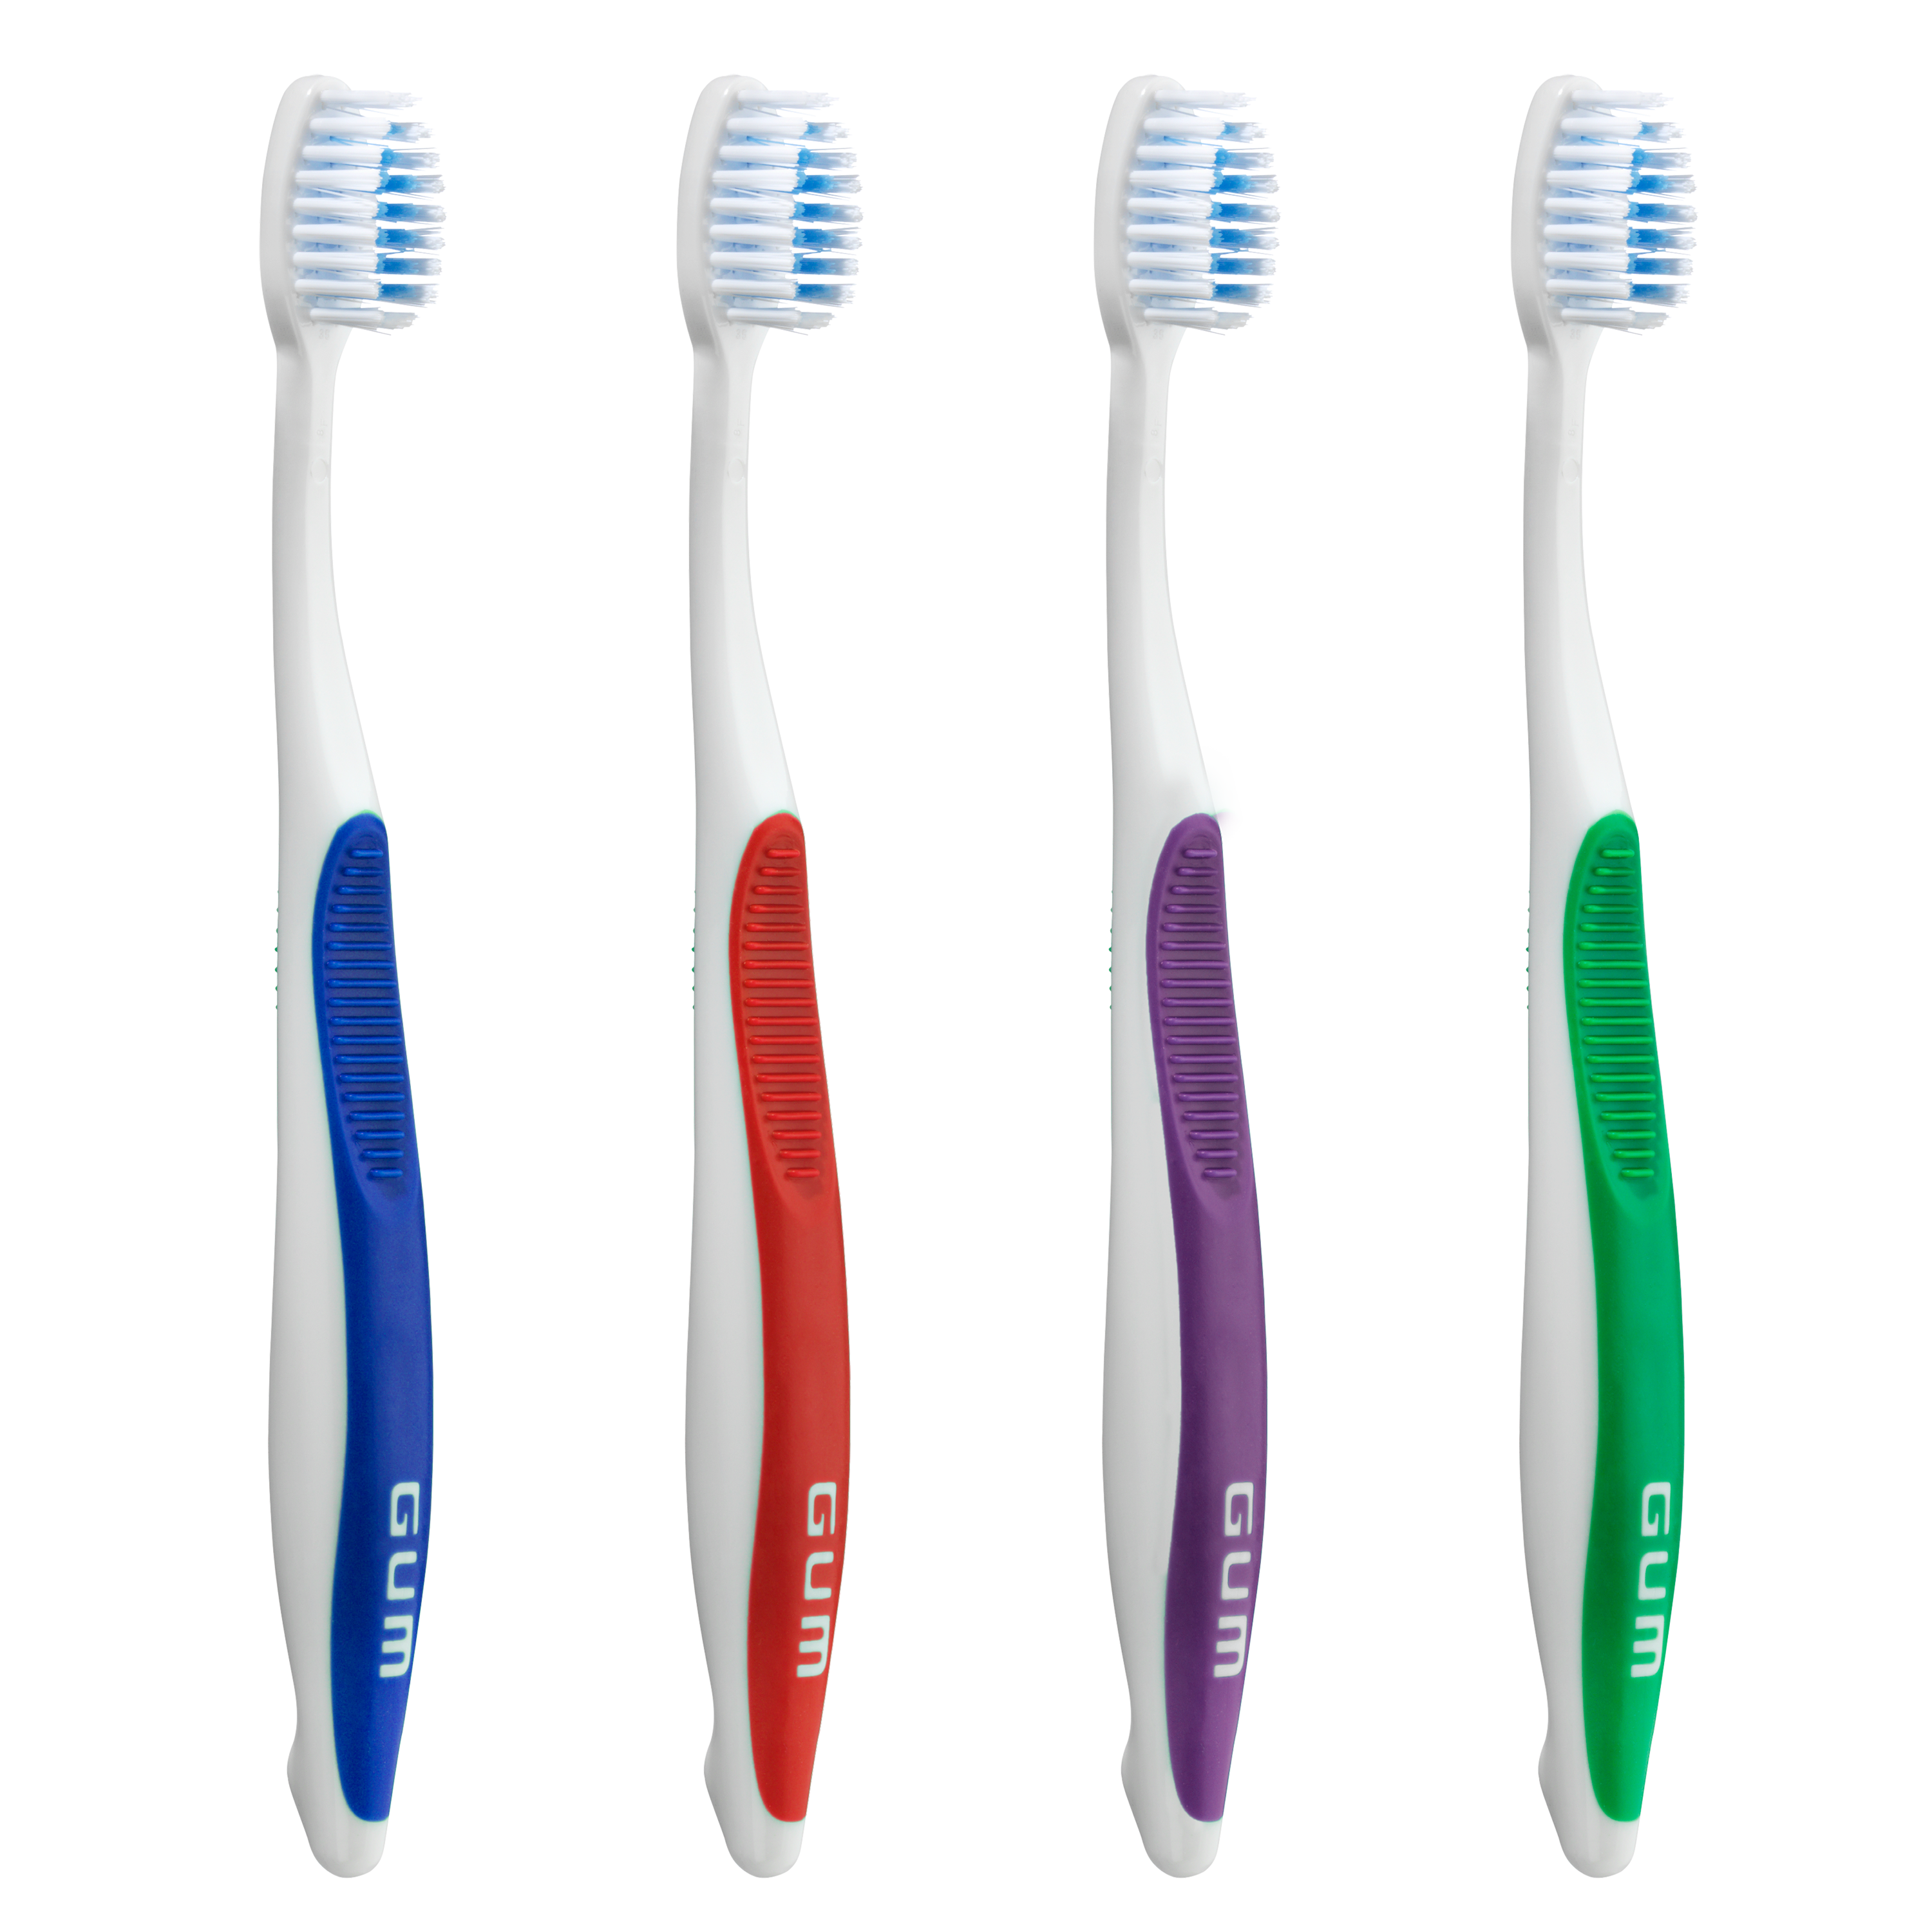 124-Product-Toothbrush-Manual-Orthodontic-naked-4colors.png